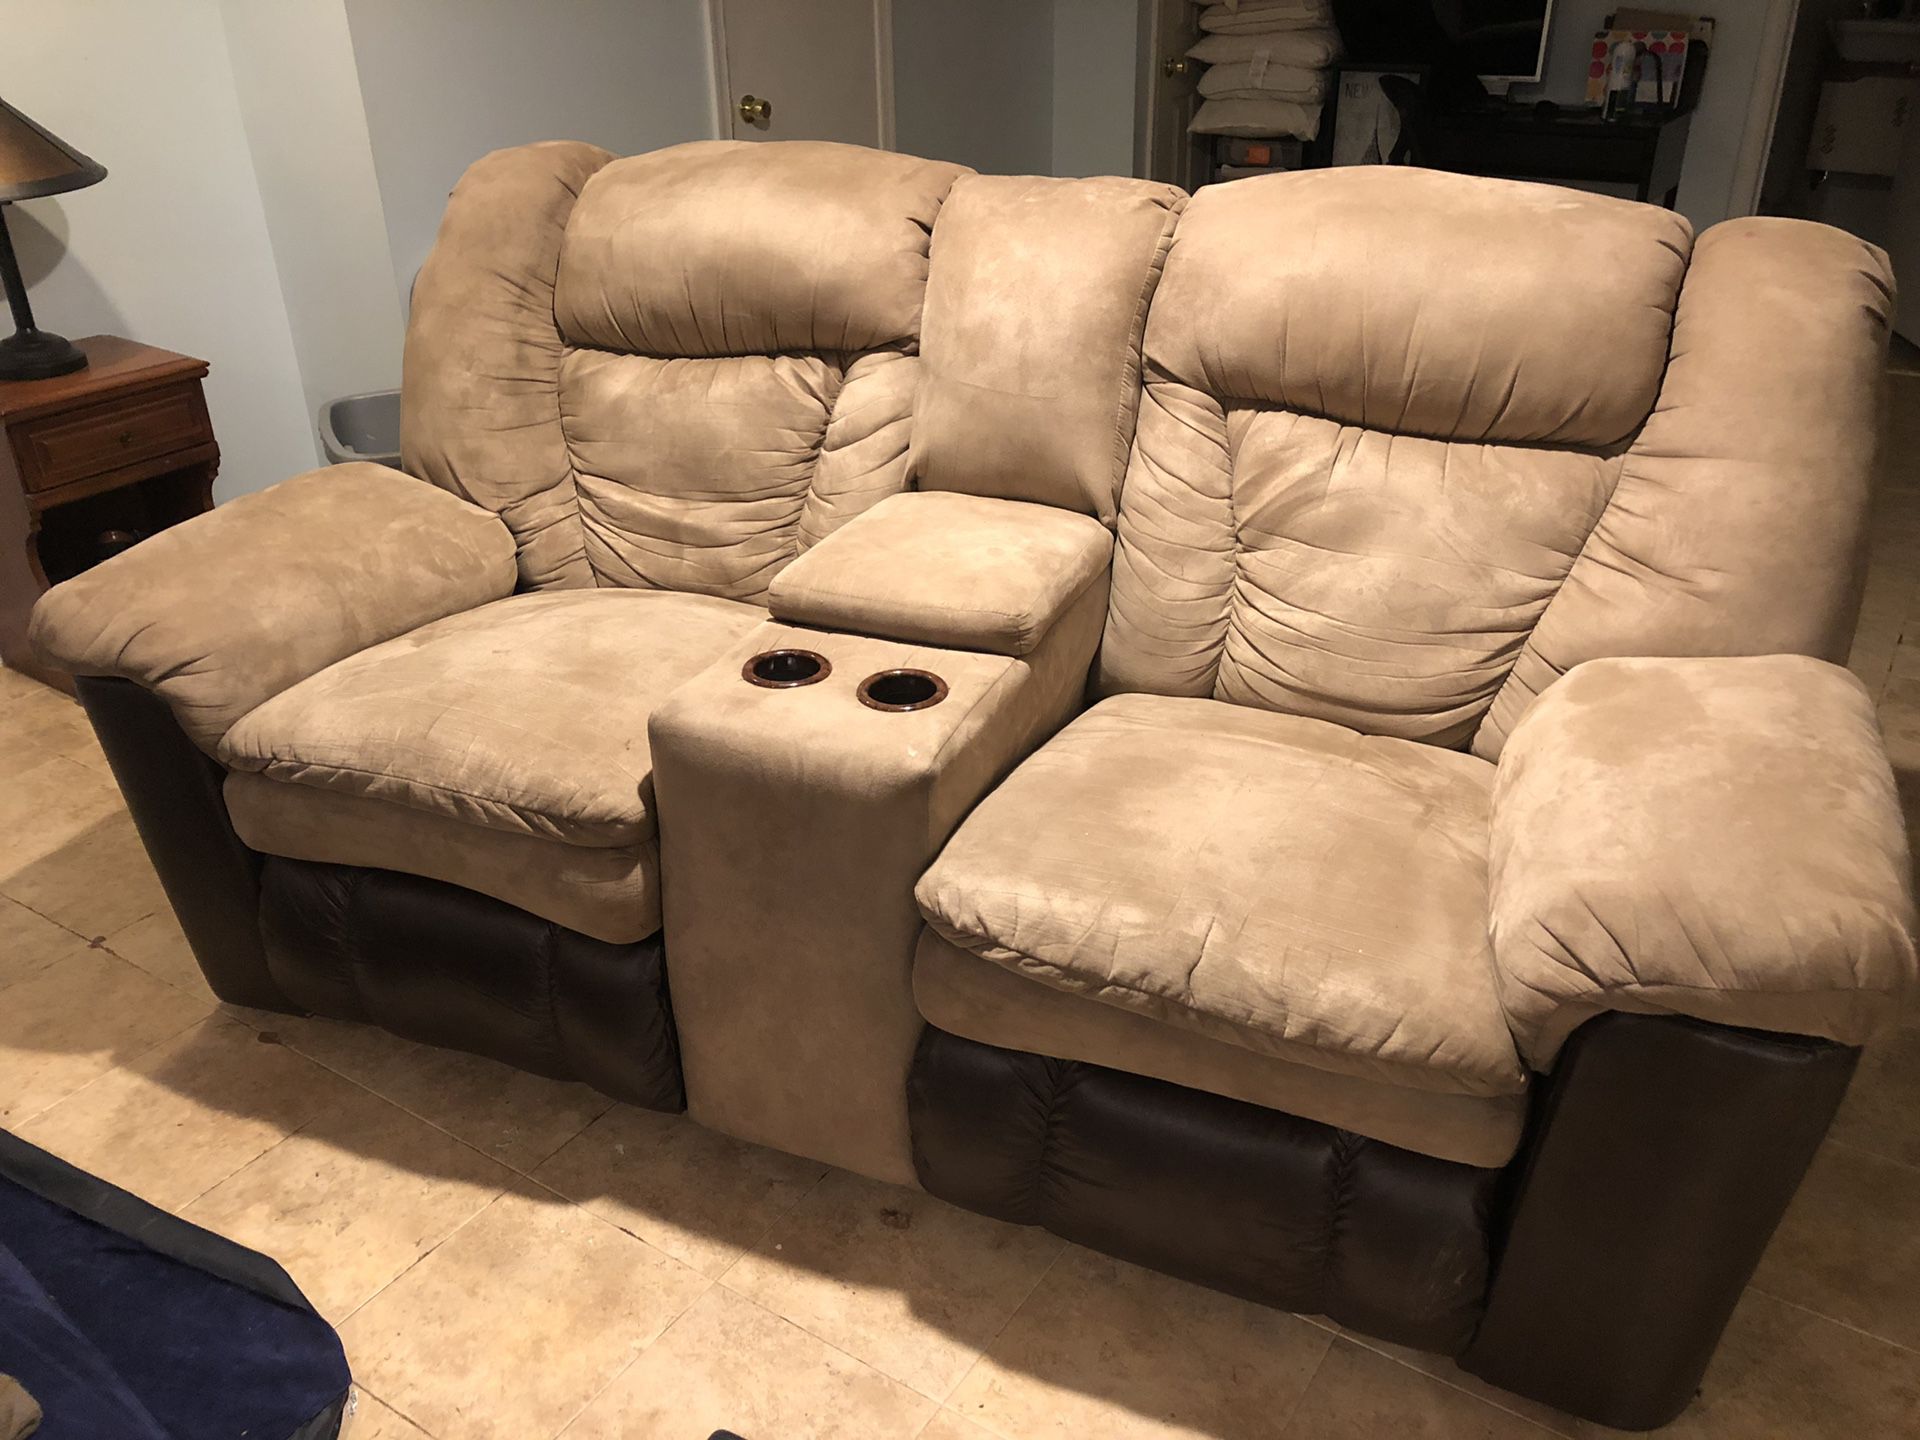 Moving out, recliner sofa in working condition $50